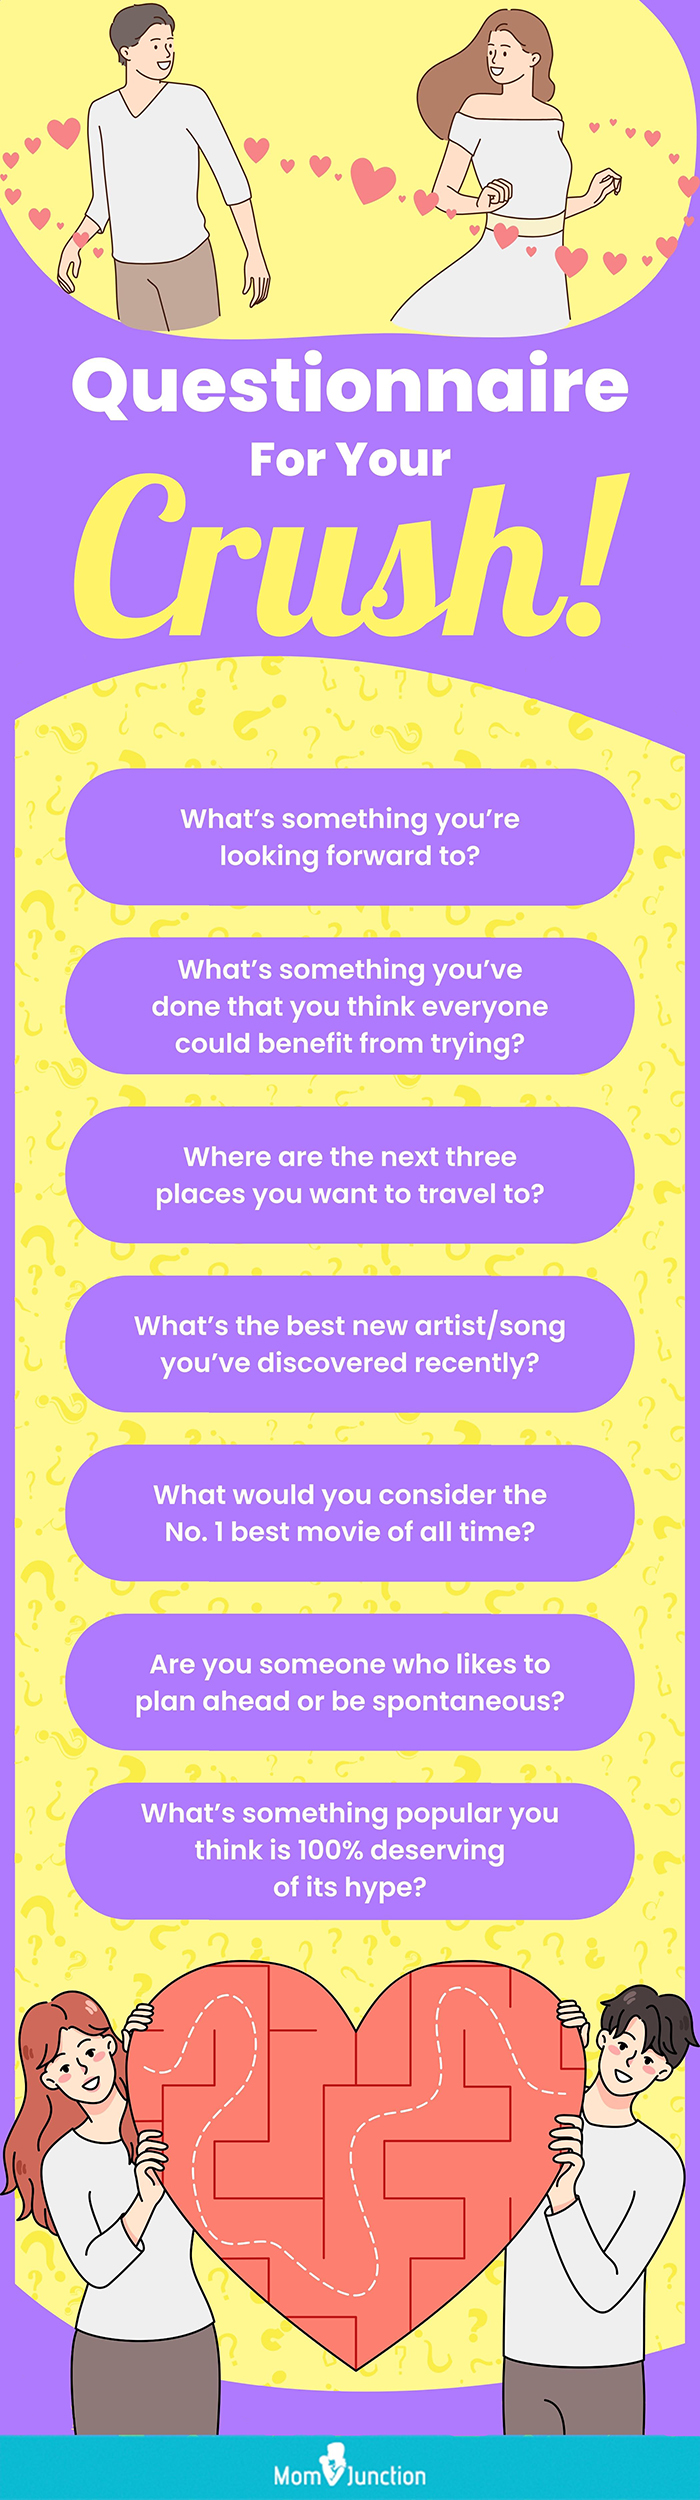 questions to ask your crush [infographic]